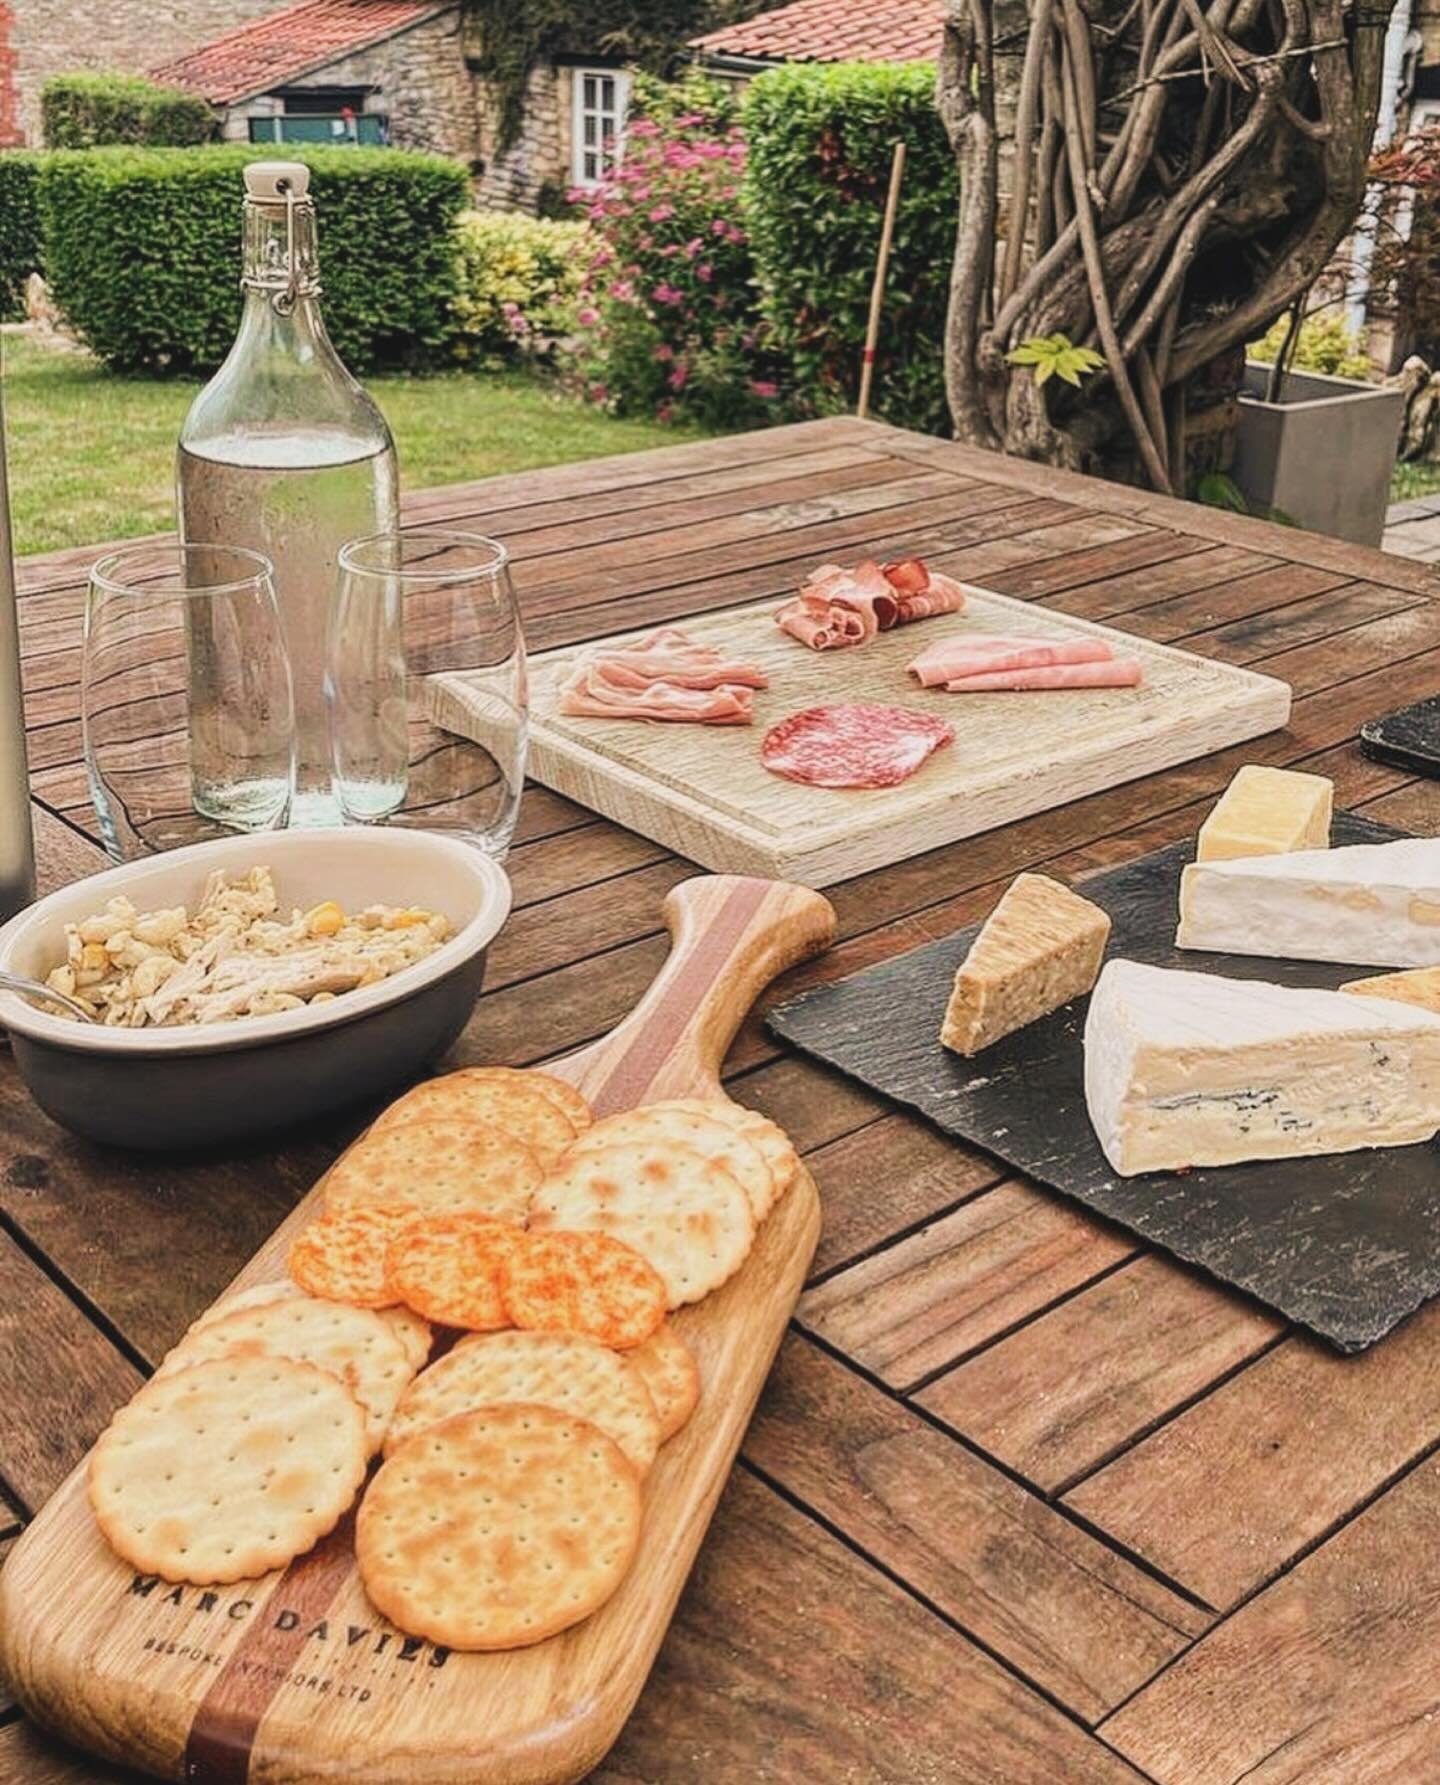 GIVE AWAY!!!!!!
With the weather finally changing alfresco dining season has begun. To celebrate we have decided to give away a handful of our popular handmade deli boards. 
To be in with a chance to win it&rsquo;s nice and simple. All you need to do